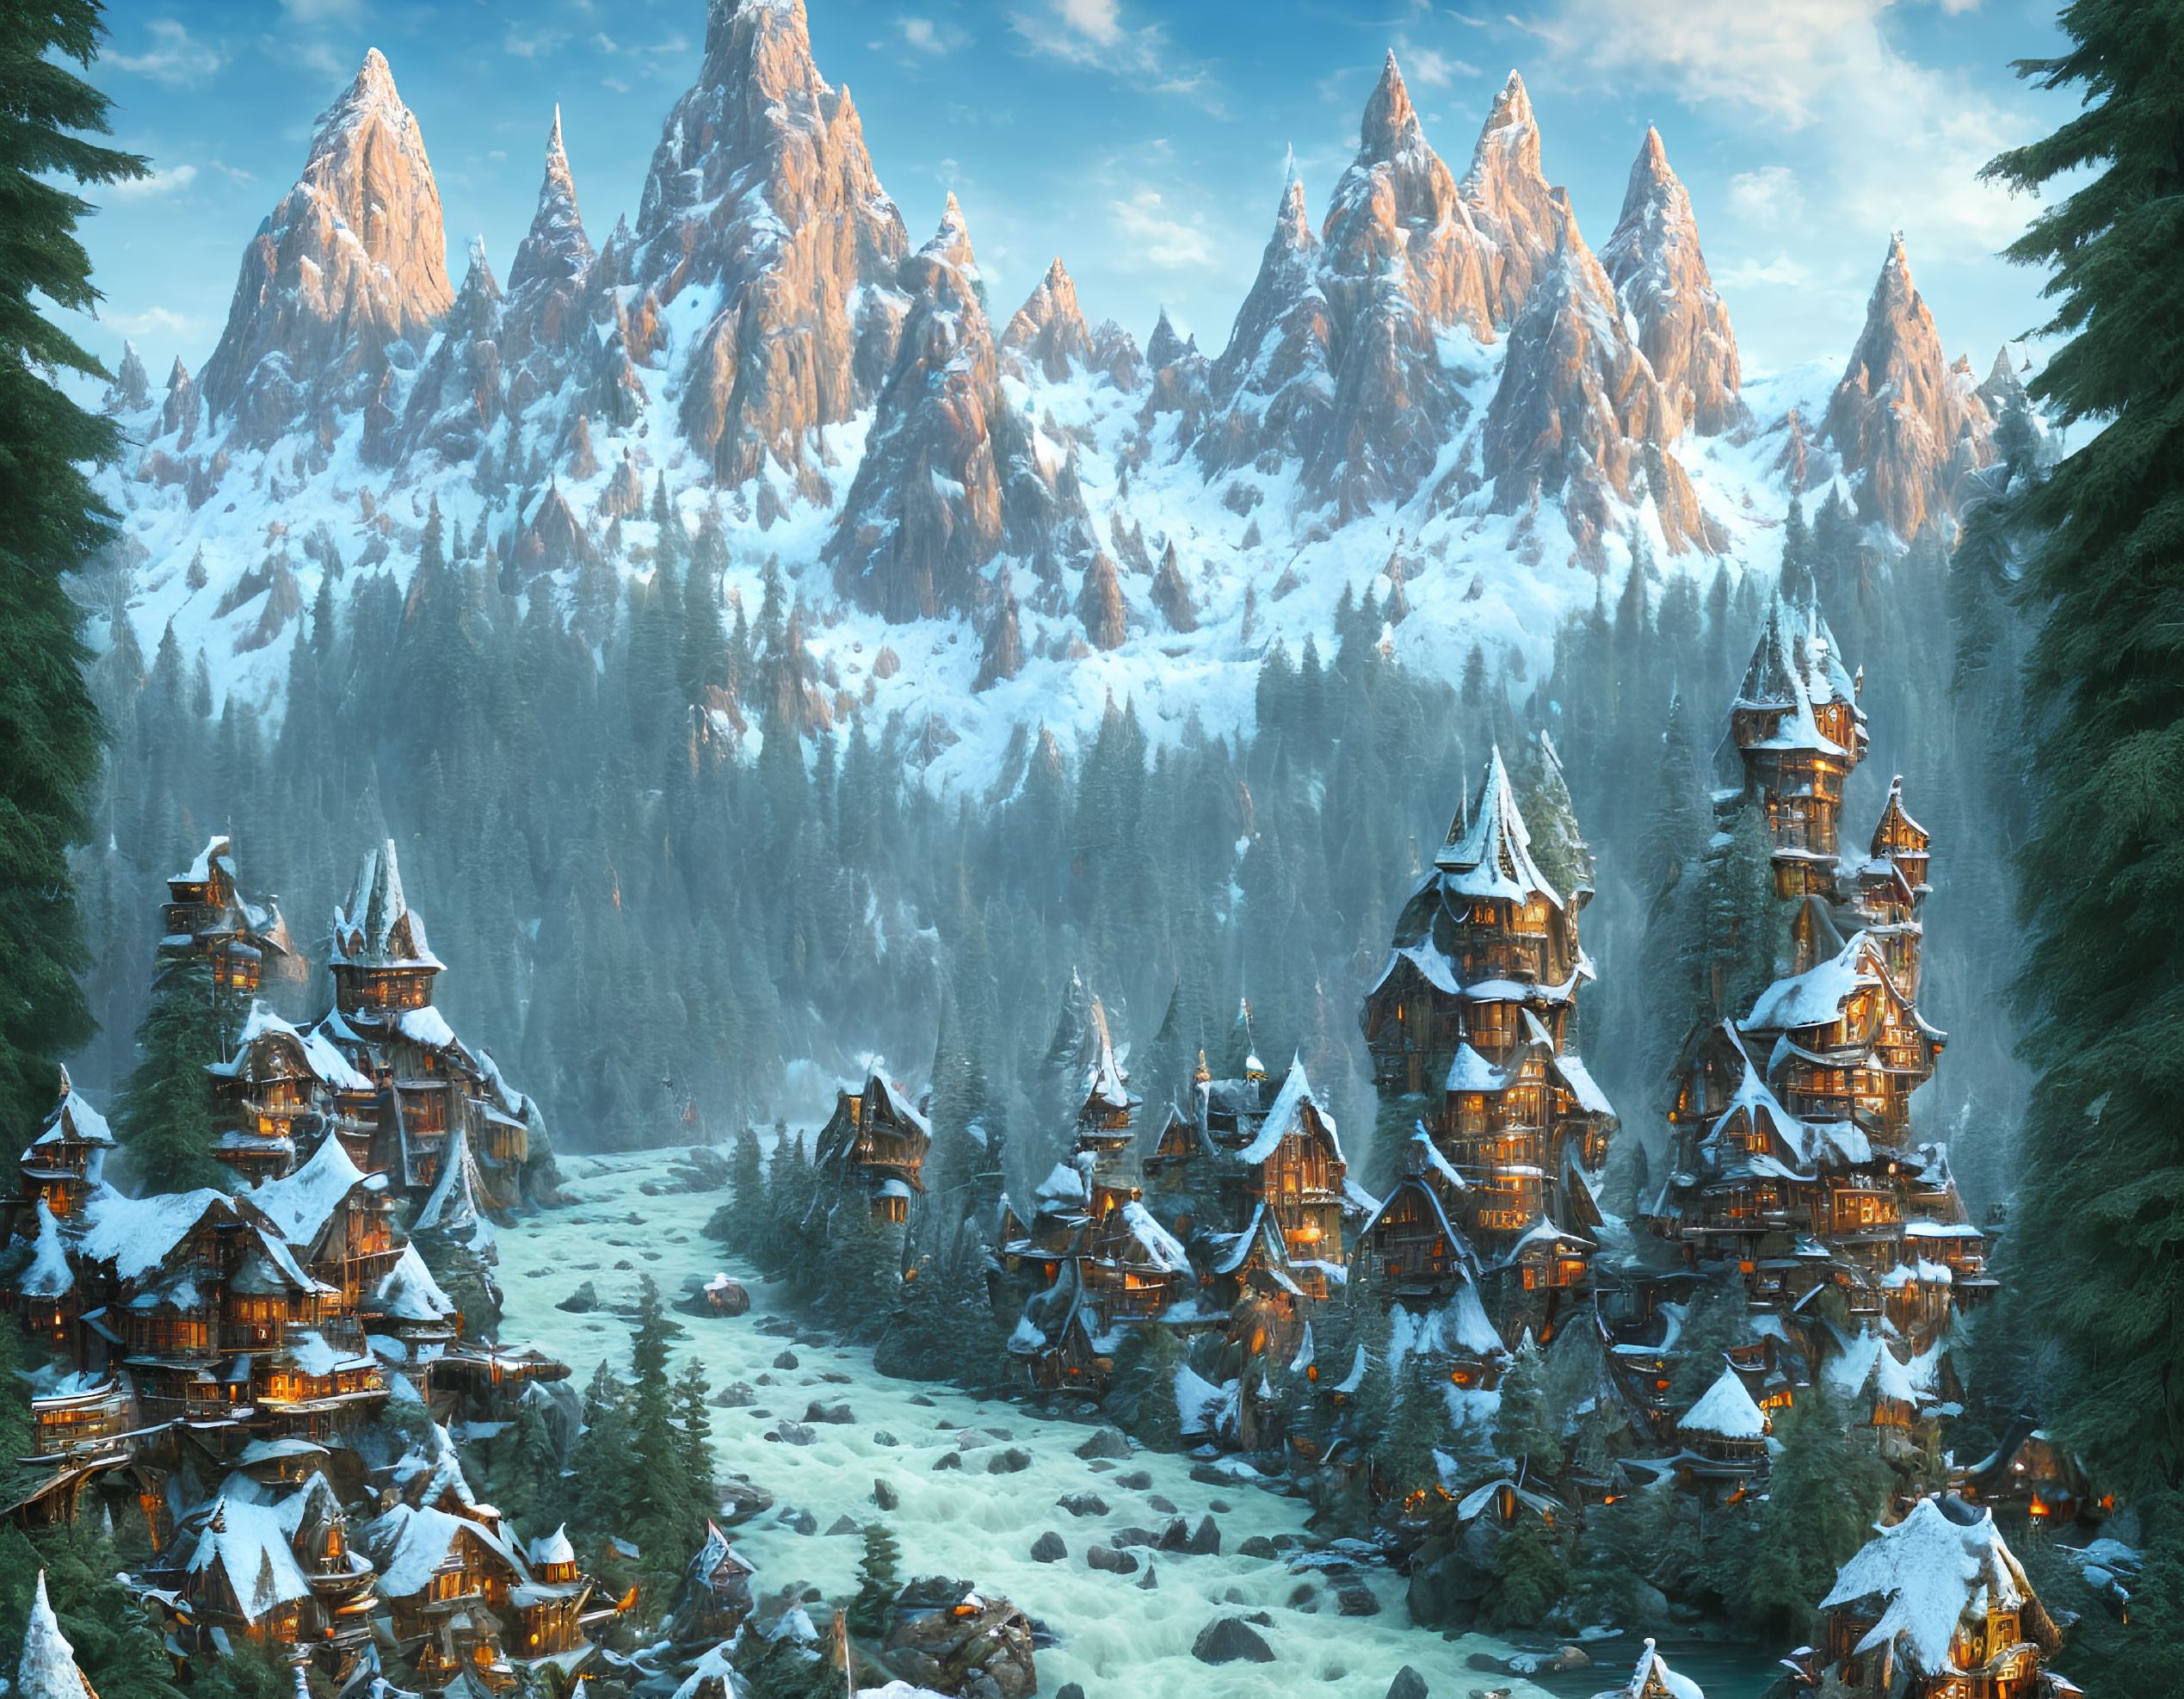 Snow-covered pines, wooden houses, and mountains in winter sunrise.